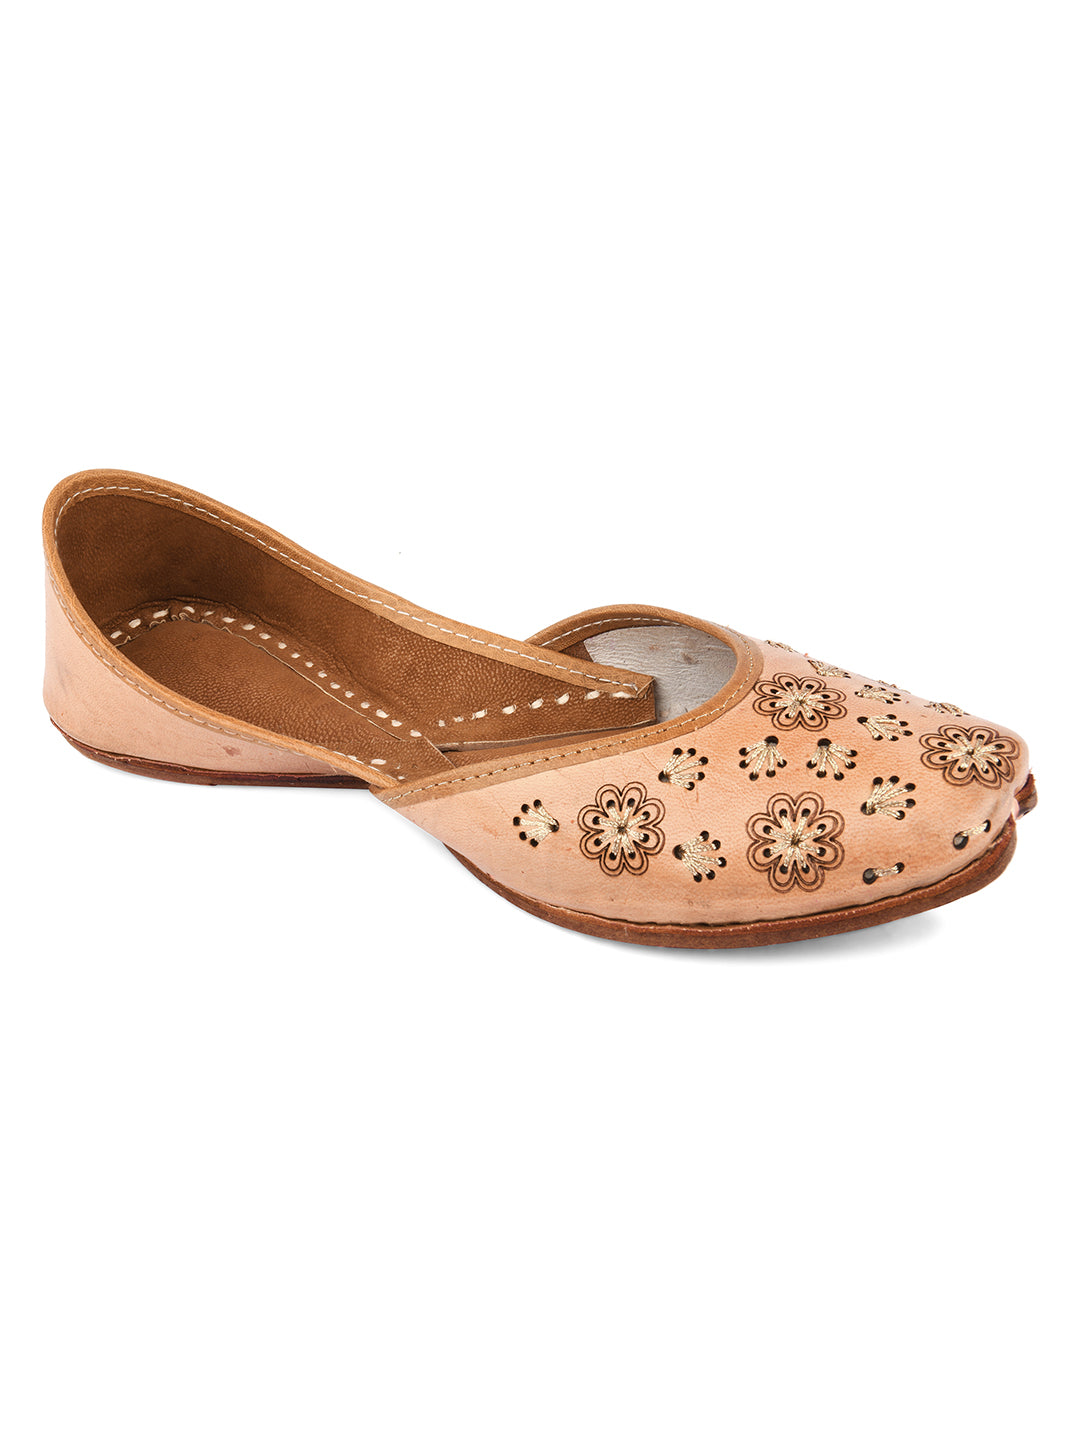 DESI COLOUR Women Nude-Coloured Textured Leather Ethnic Mojaris with Laser Cuts Flats